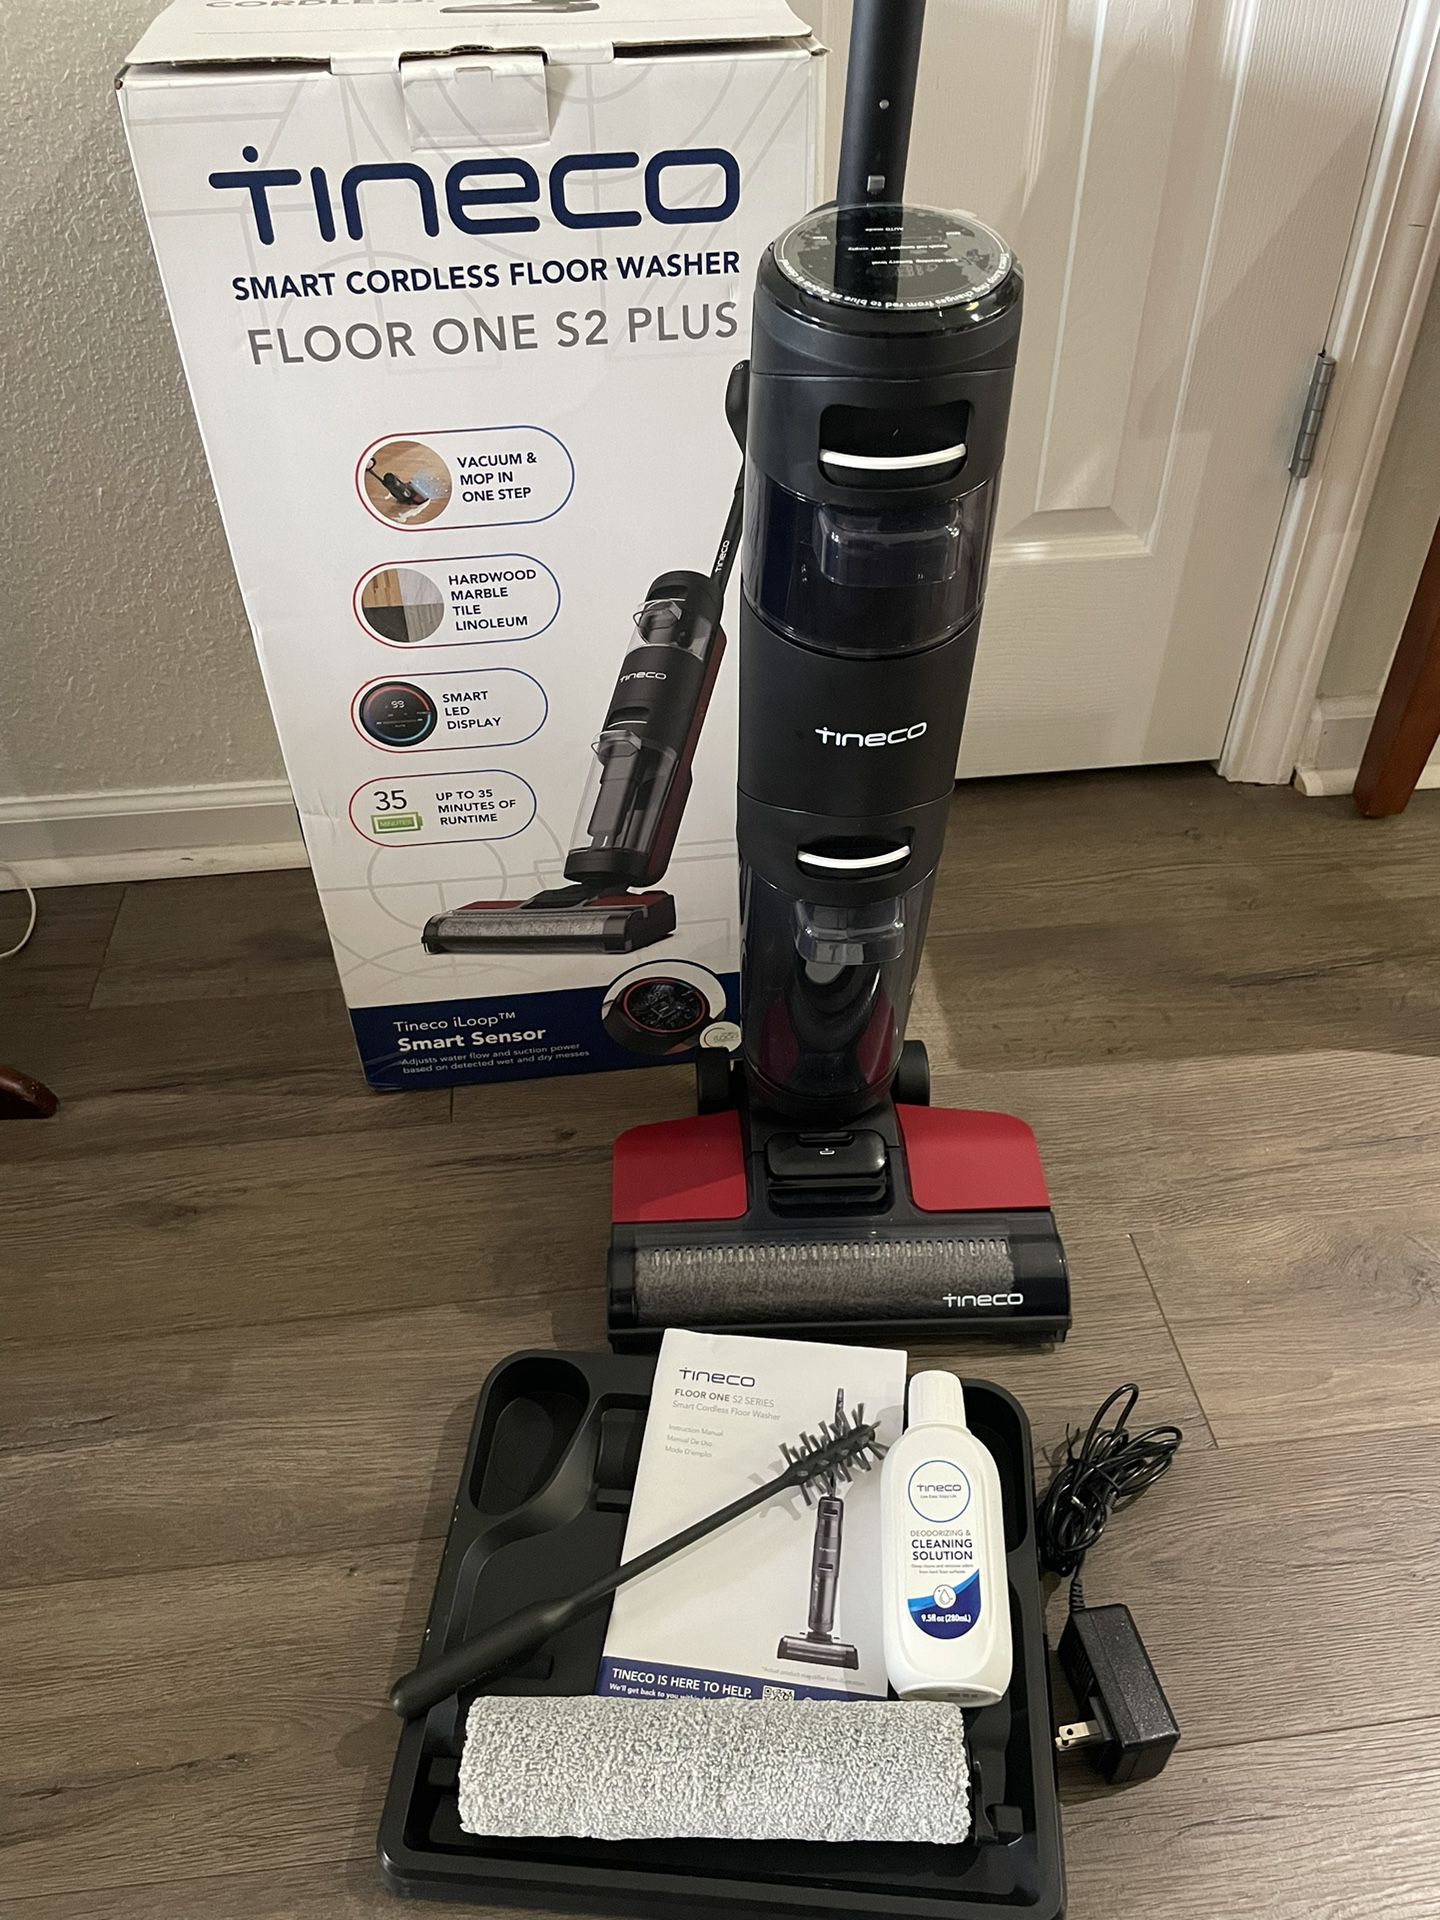 iFloor S2 Plus Cordless Wet/Dry Vacuum Cleaner and Hard Floor Washer with Accessory Pack. OPEN BOX